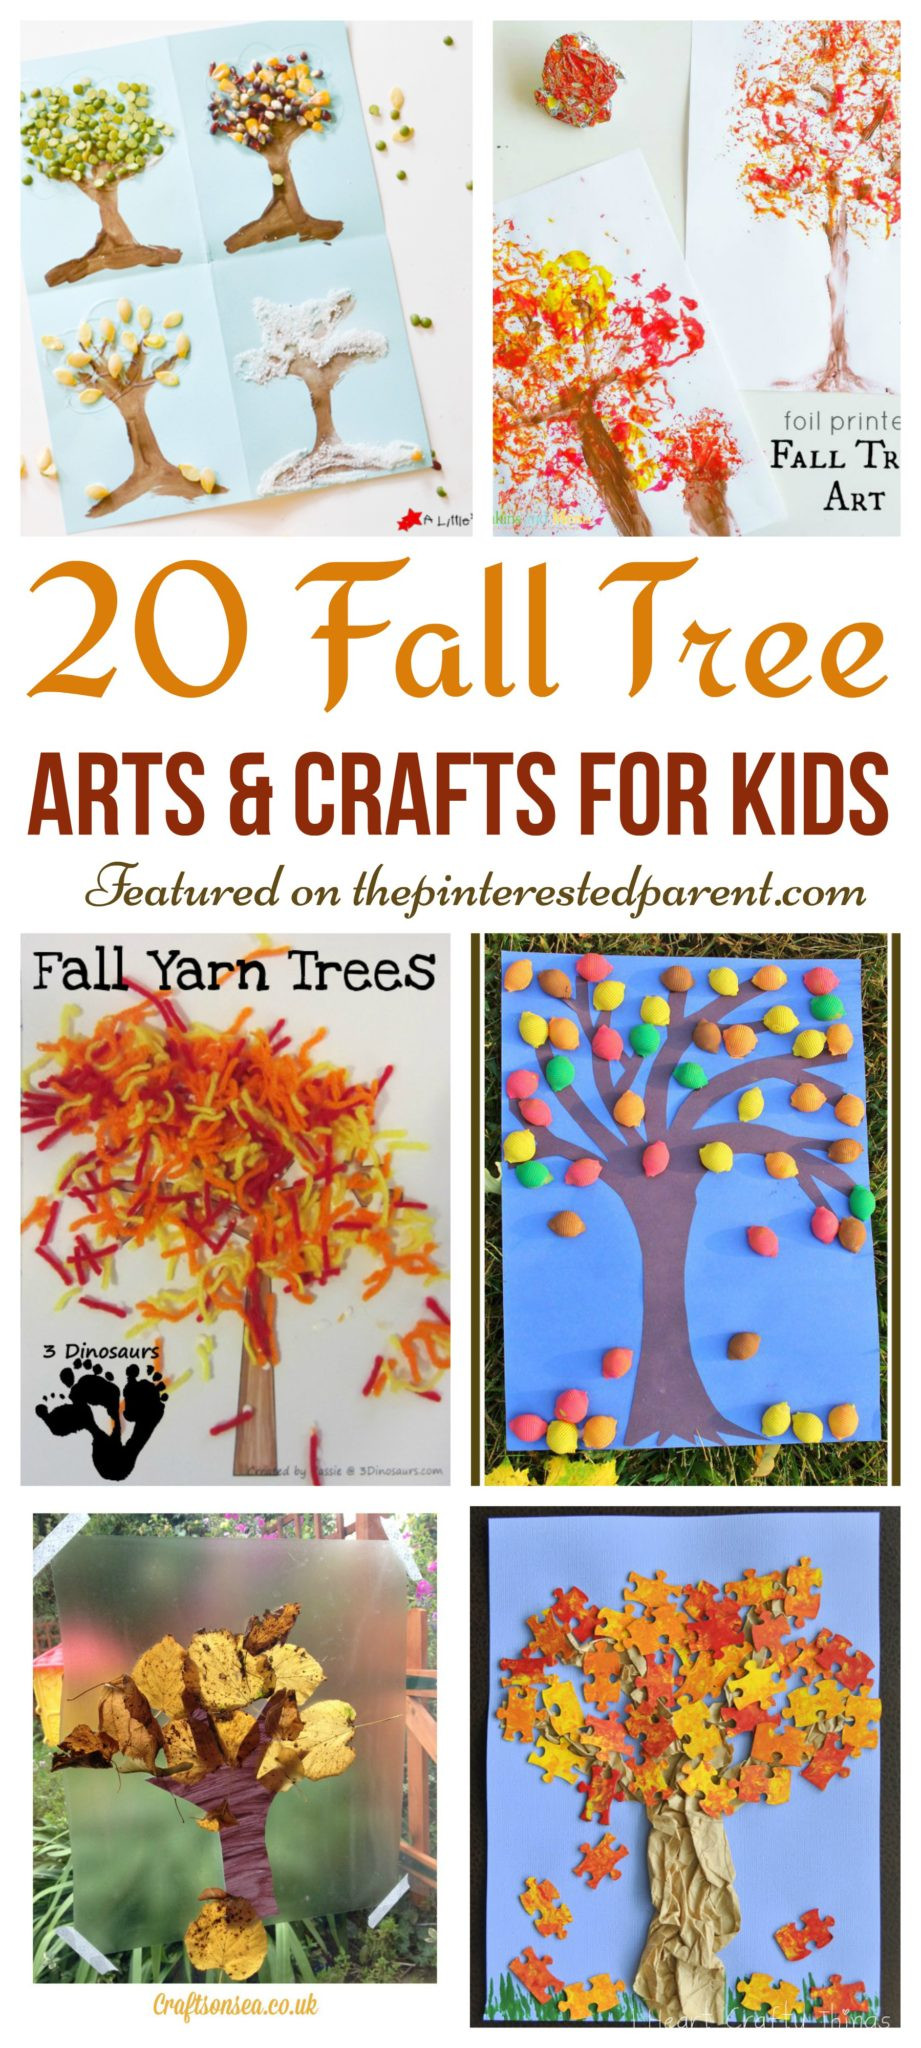 Art Craft For Preschool
 20 Fall Tree Arts & Crafts Ideas For Kids – The